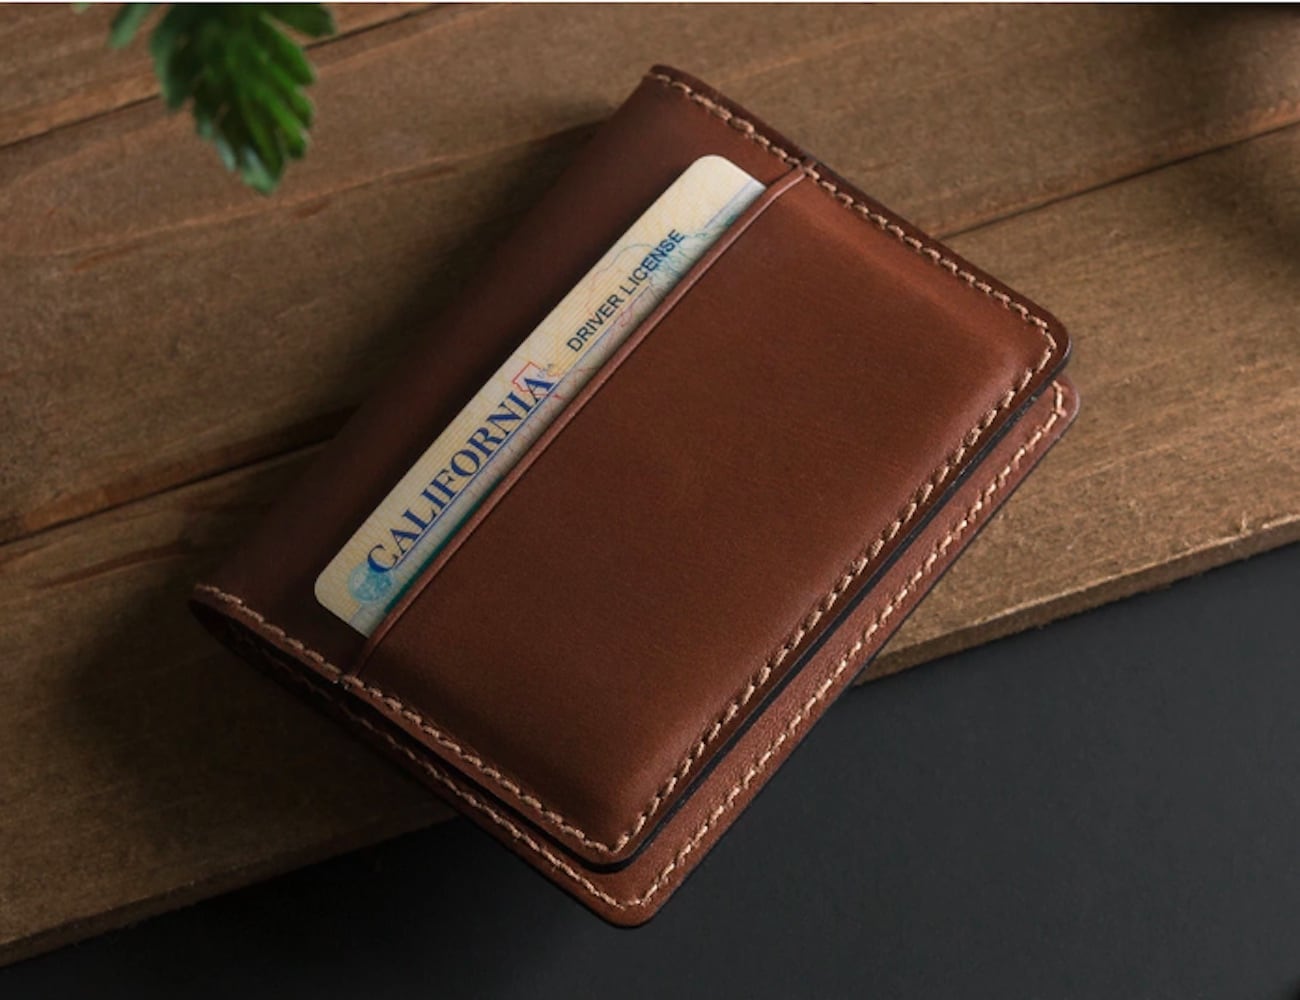 Nomad Tile Slim Tracking Wallet adds intelligence to style